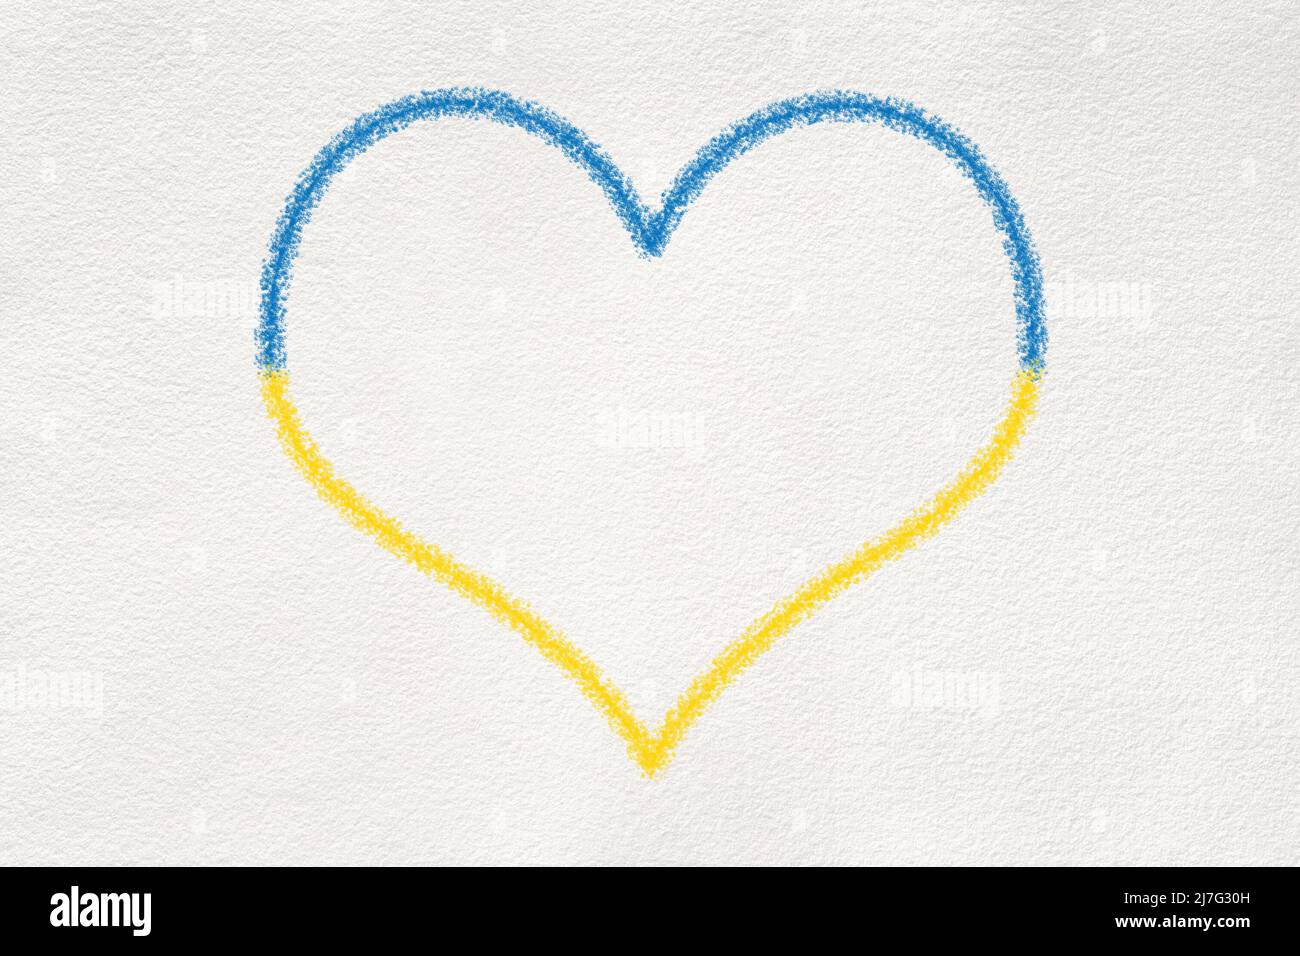 Heart shape crayon drawing on white textured paper in Ukrainian Flag colors: blue and yellow. Stock Photo